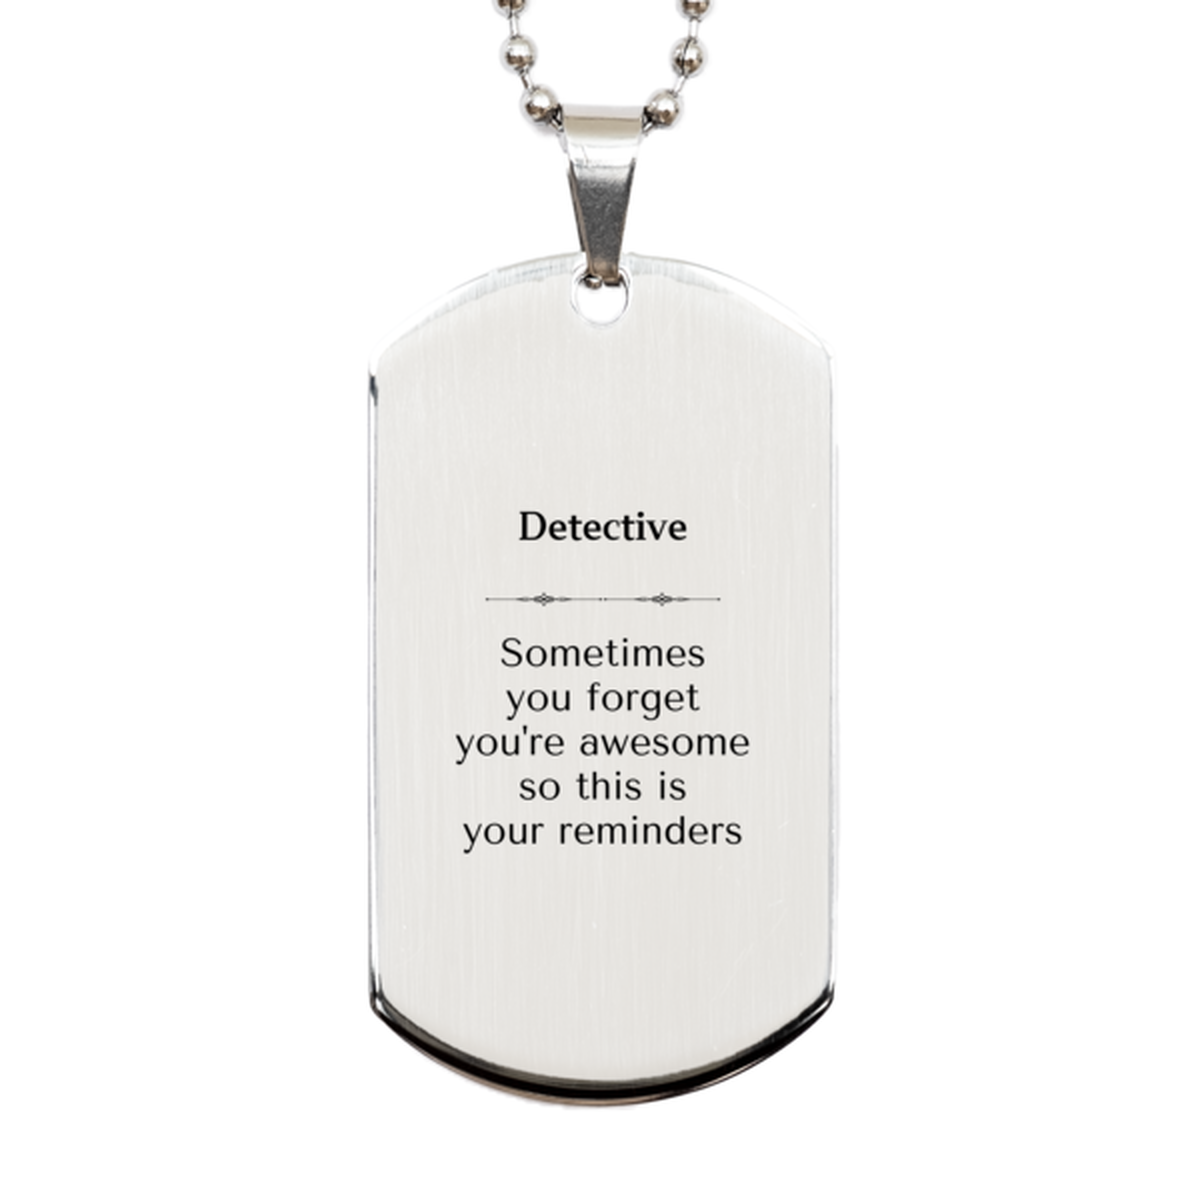 Sentimental Detective Silver Dog Tag, Detective Sometimes you forget you're awesome so this is your reminders, Graduation Christmas Birthday Gifts for Detective, Men, Women, Coworkers